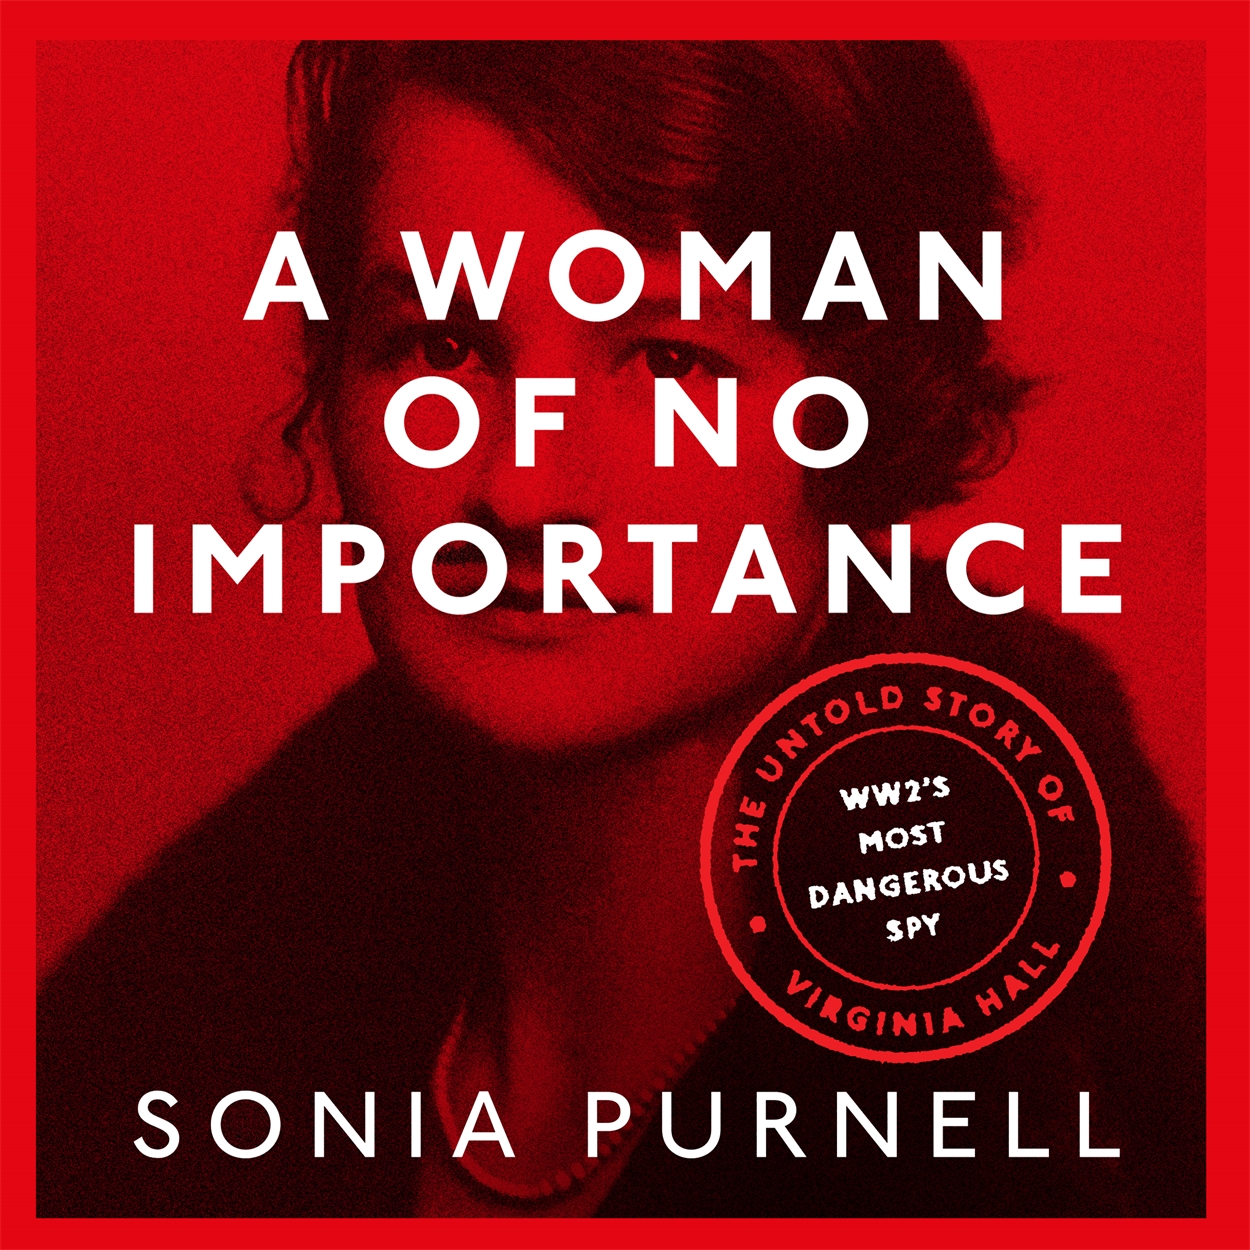 a woman of no importance by sonia purnell summary